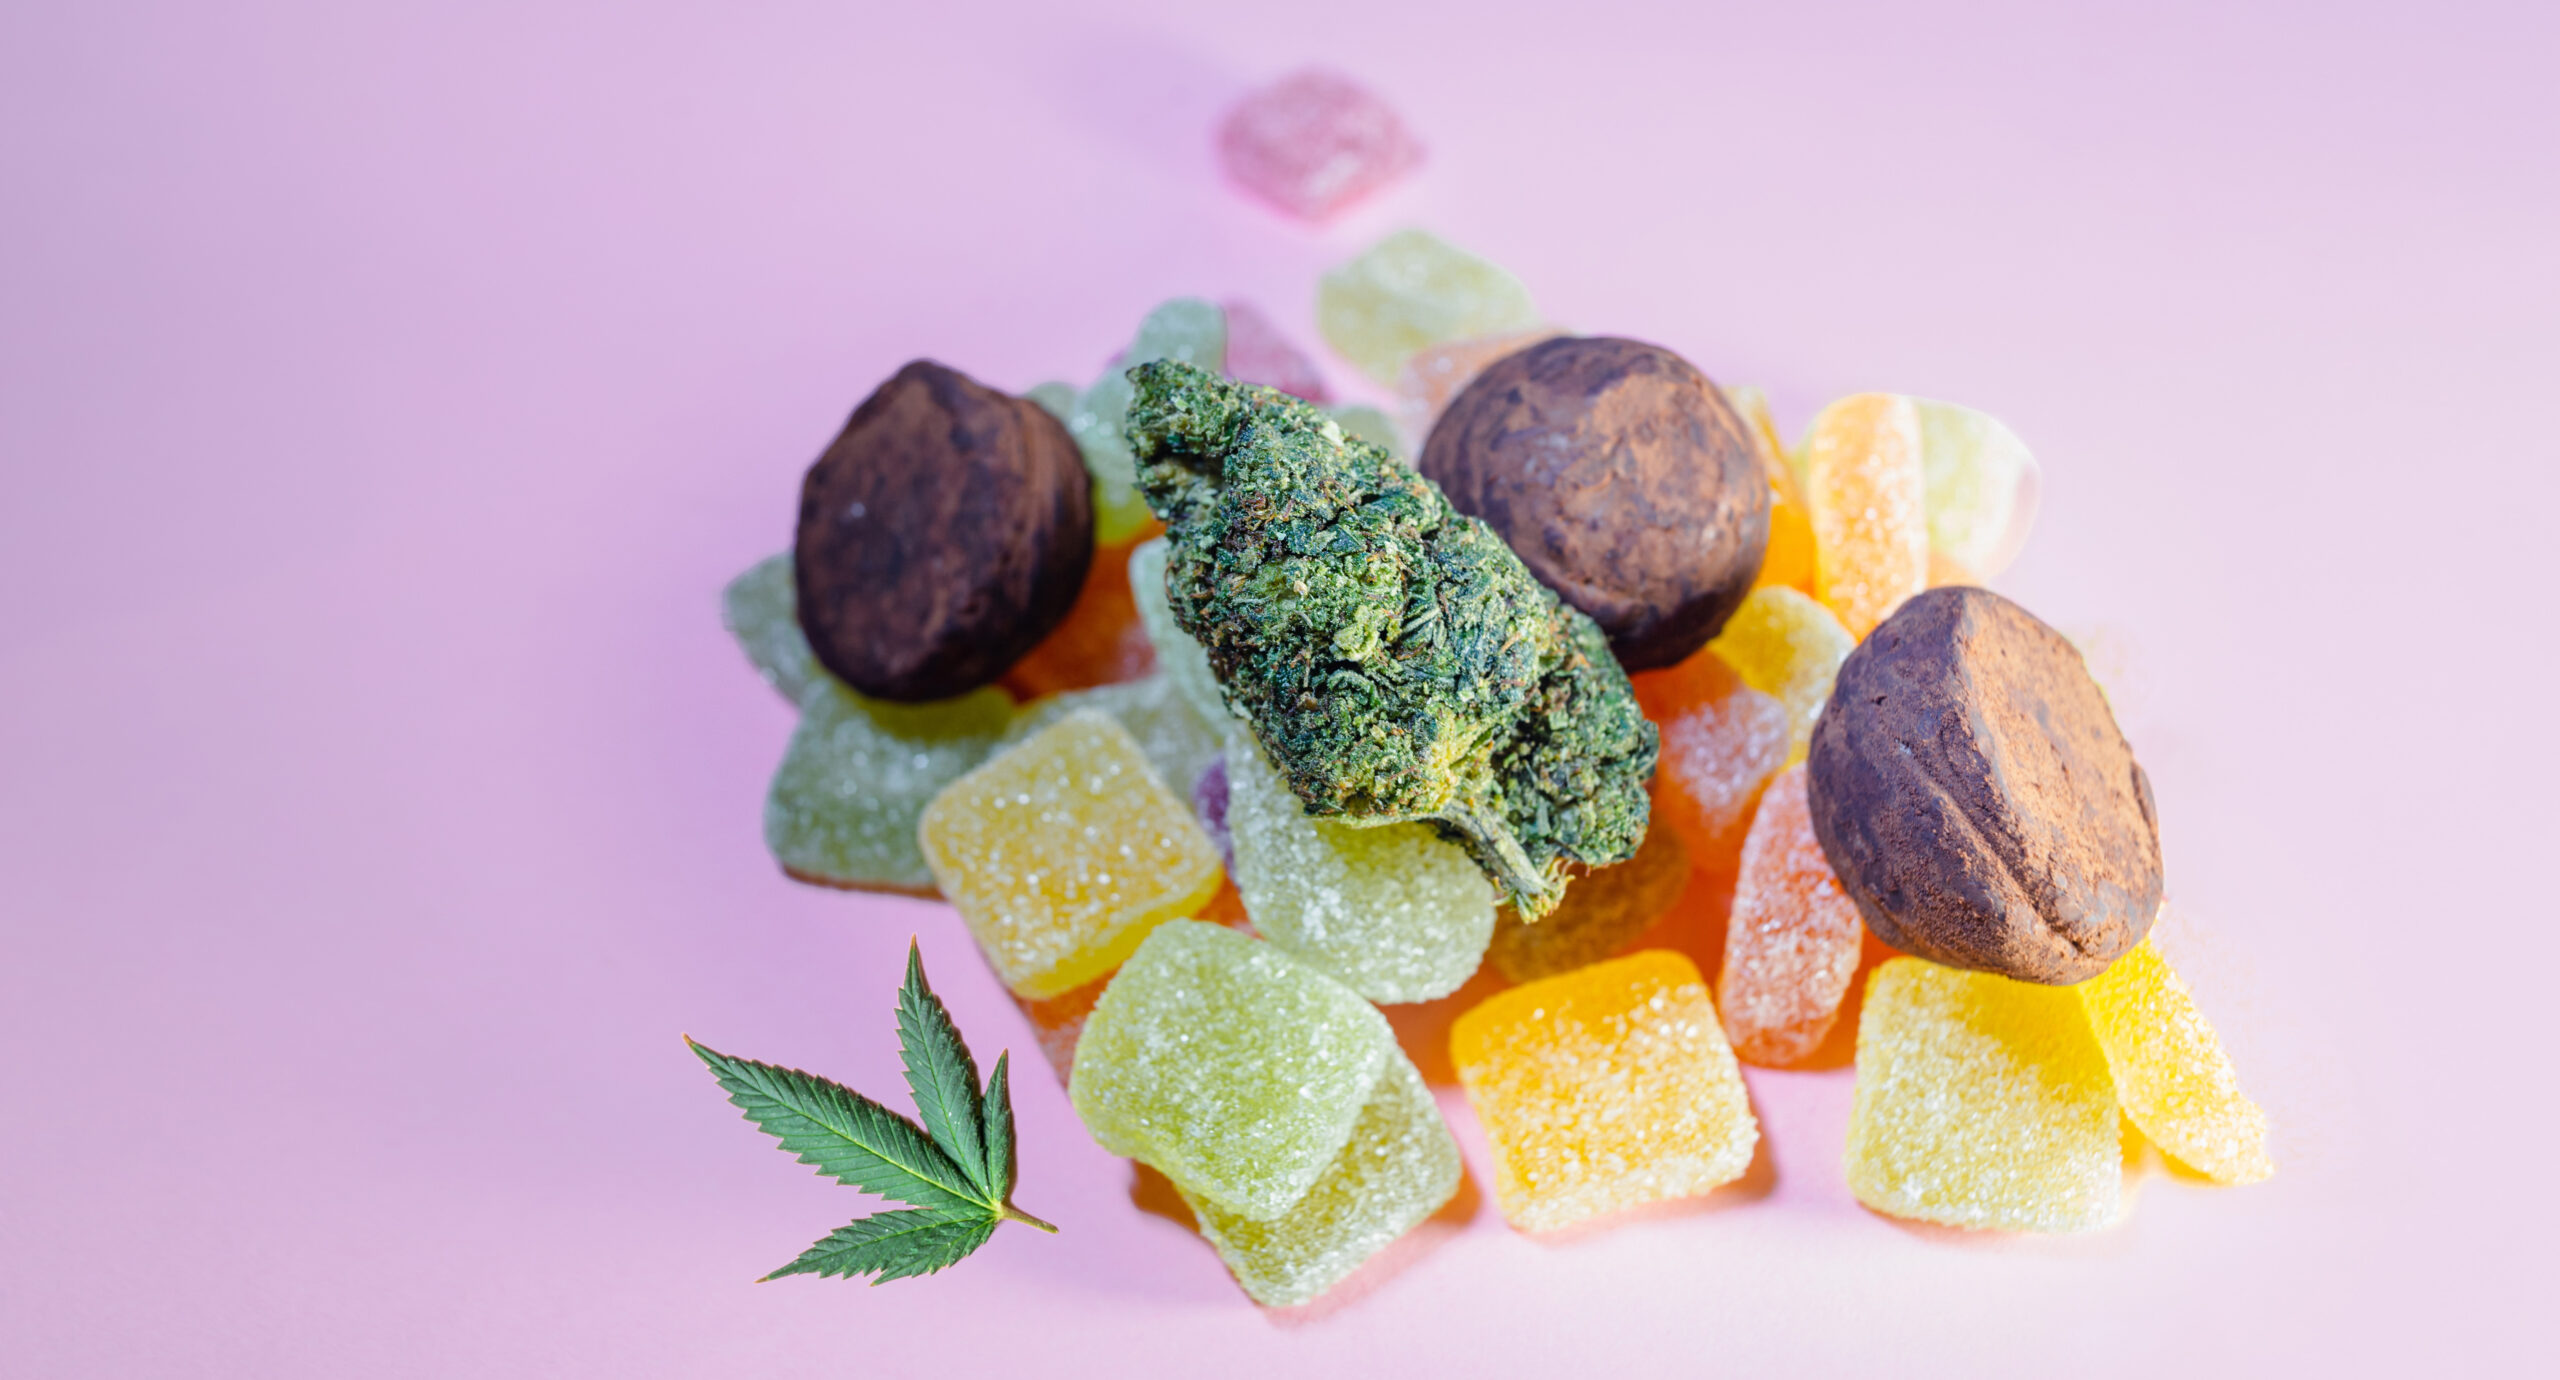 How Long Do Edibles Stay in Your System?